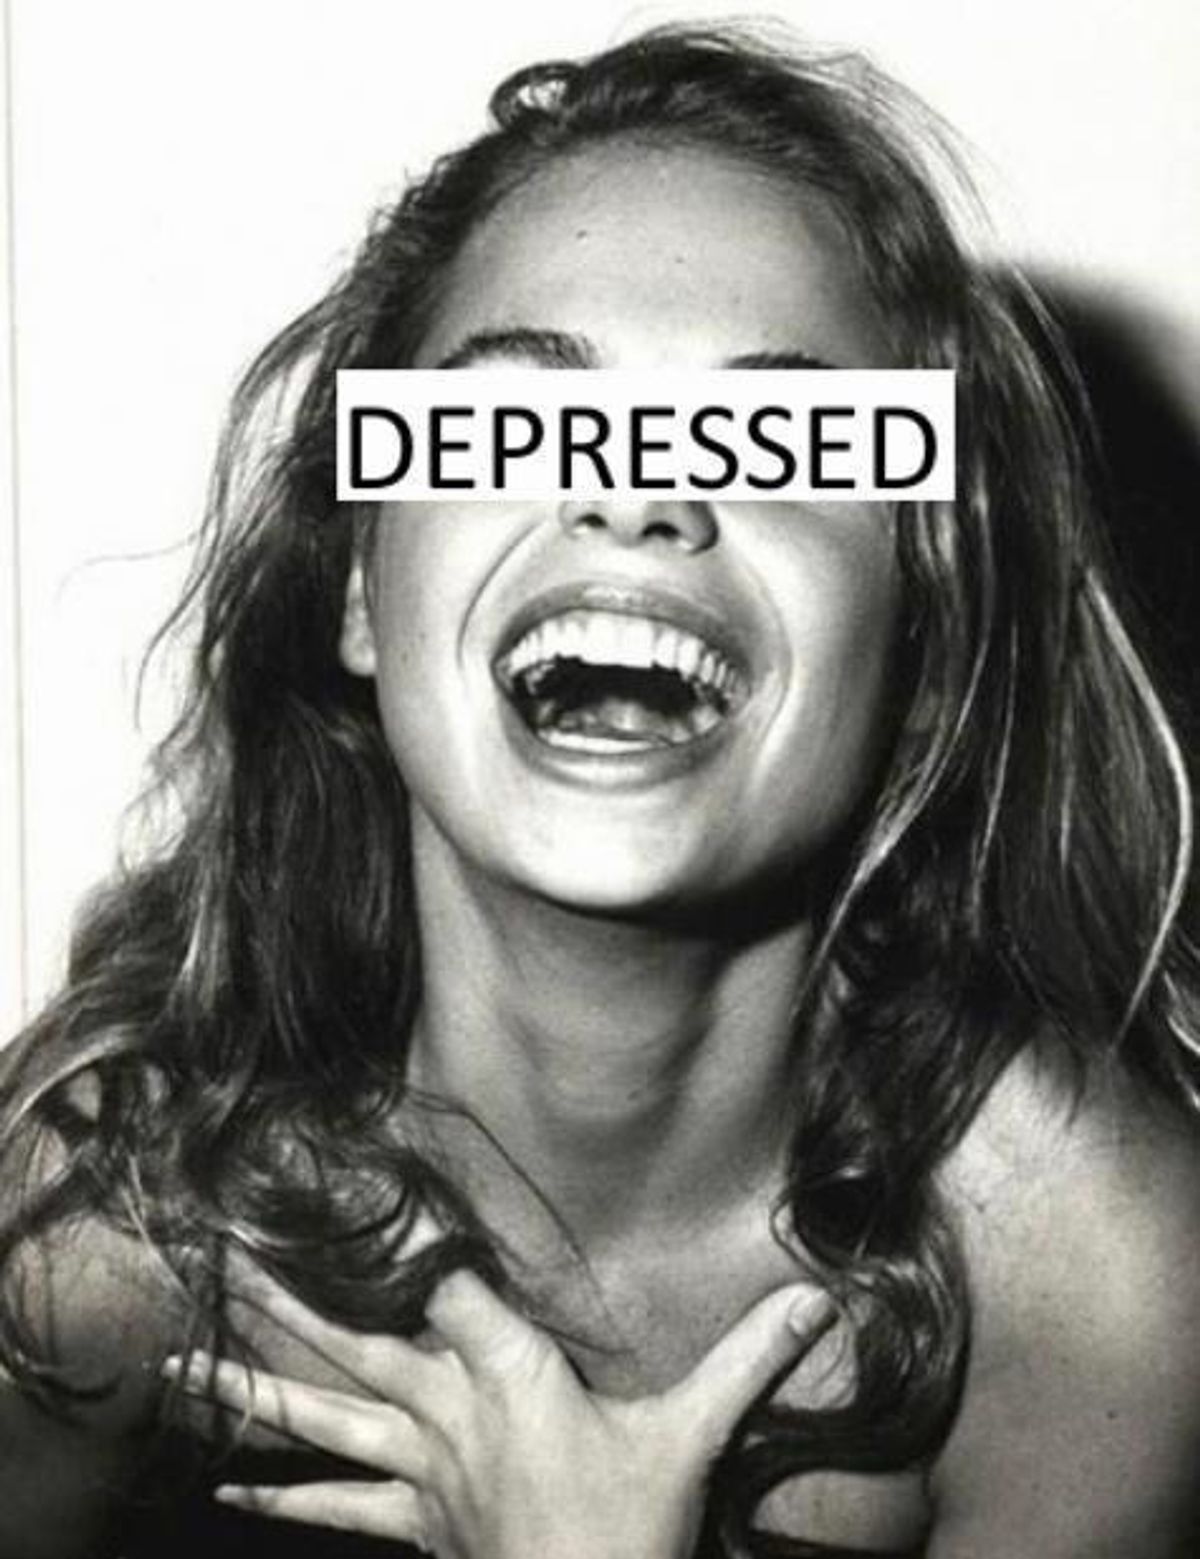 Ever Heard Of Smiling Depression?